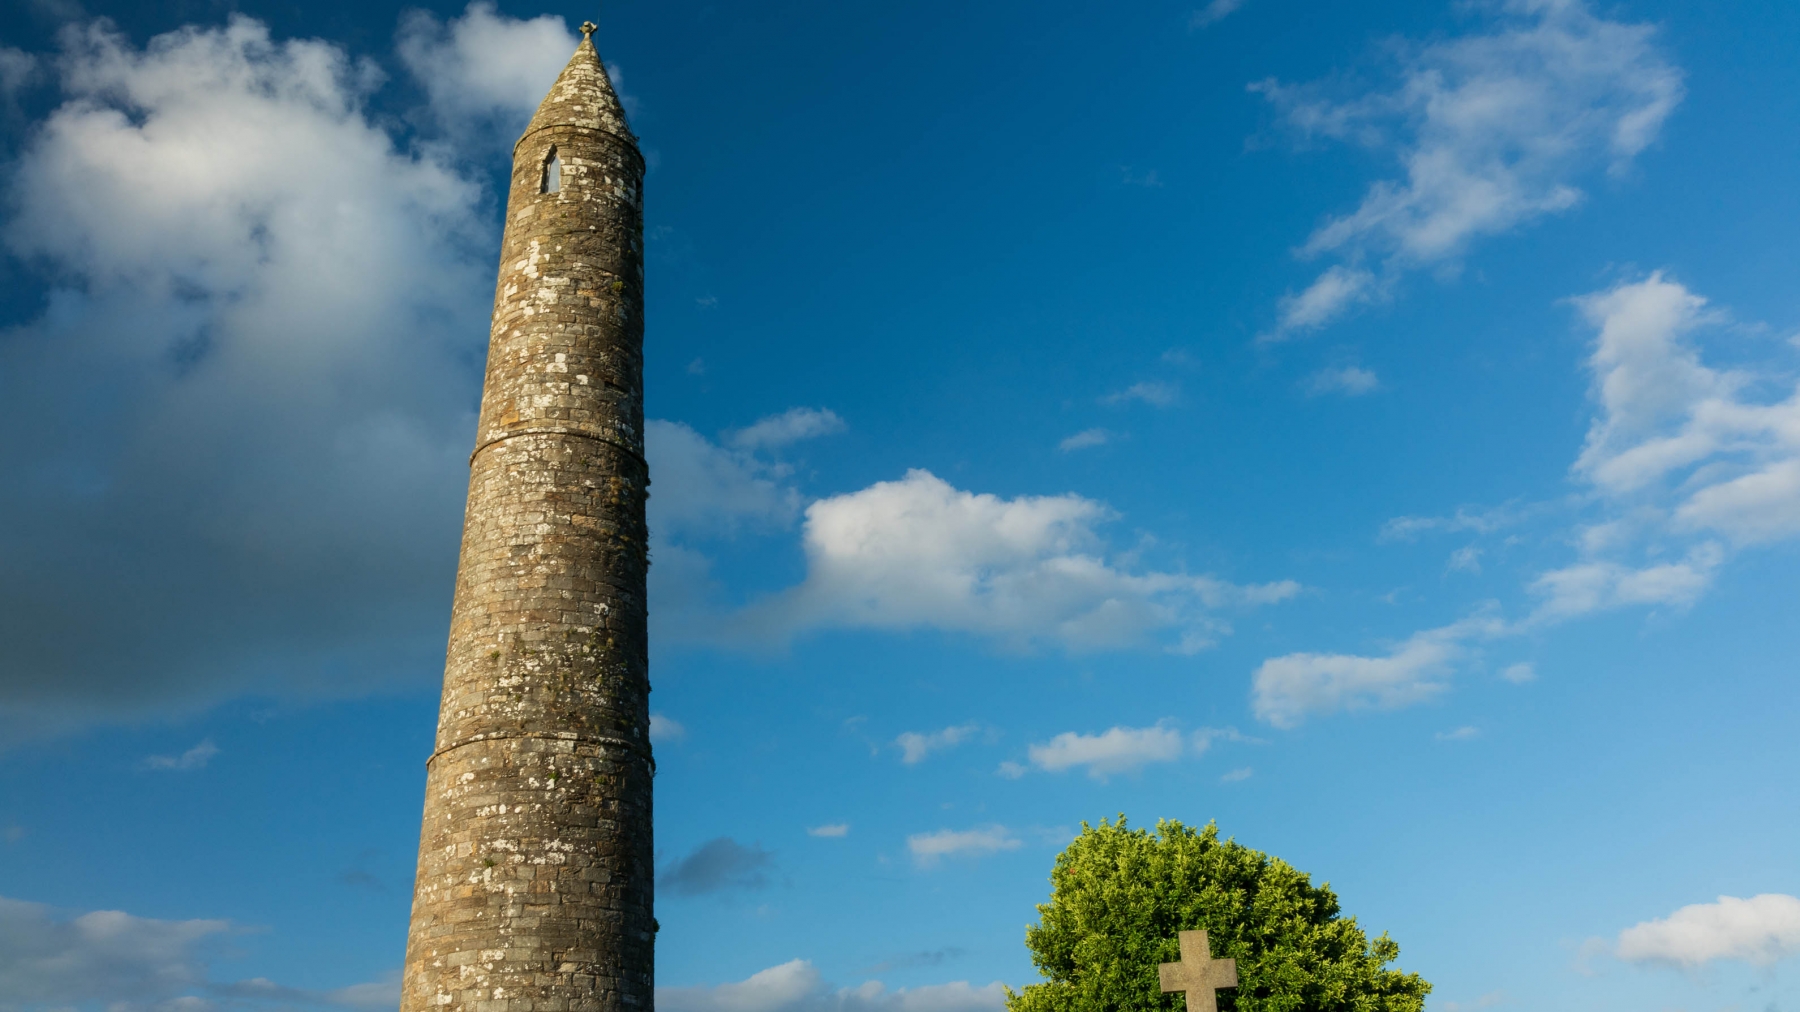 Thought to be built around the 12th Century the round tower of Ardmore is around 30m tall (98ft).